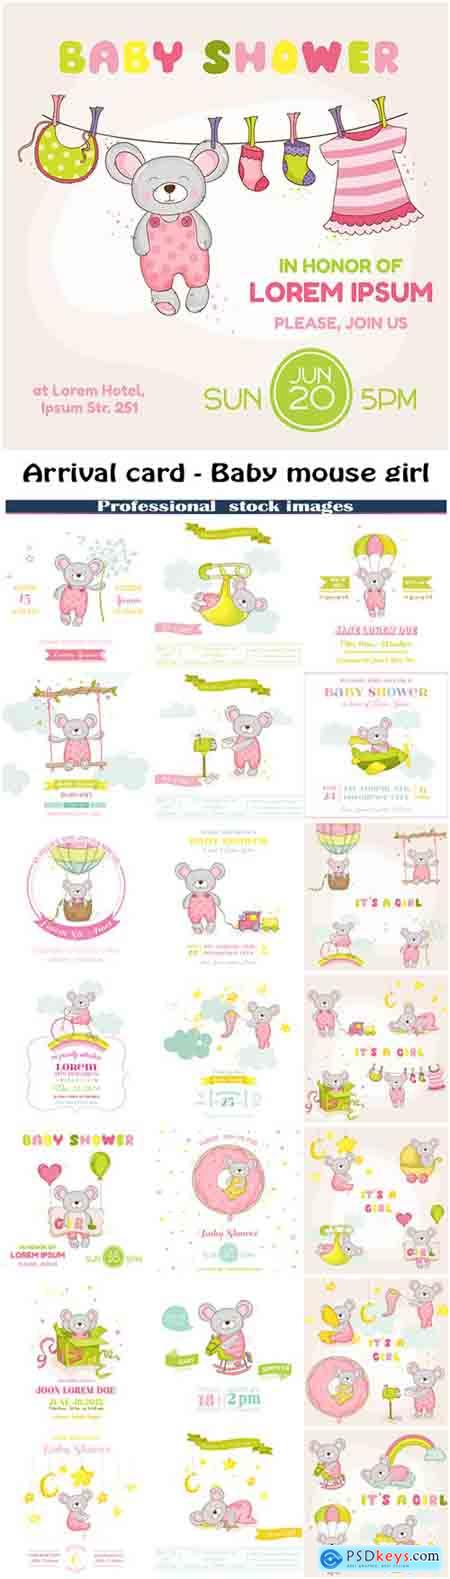 Baby Shower or Arrival Card - Baby Mouse Girl